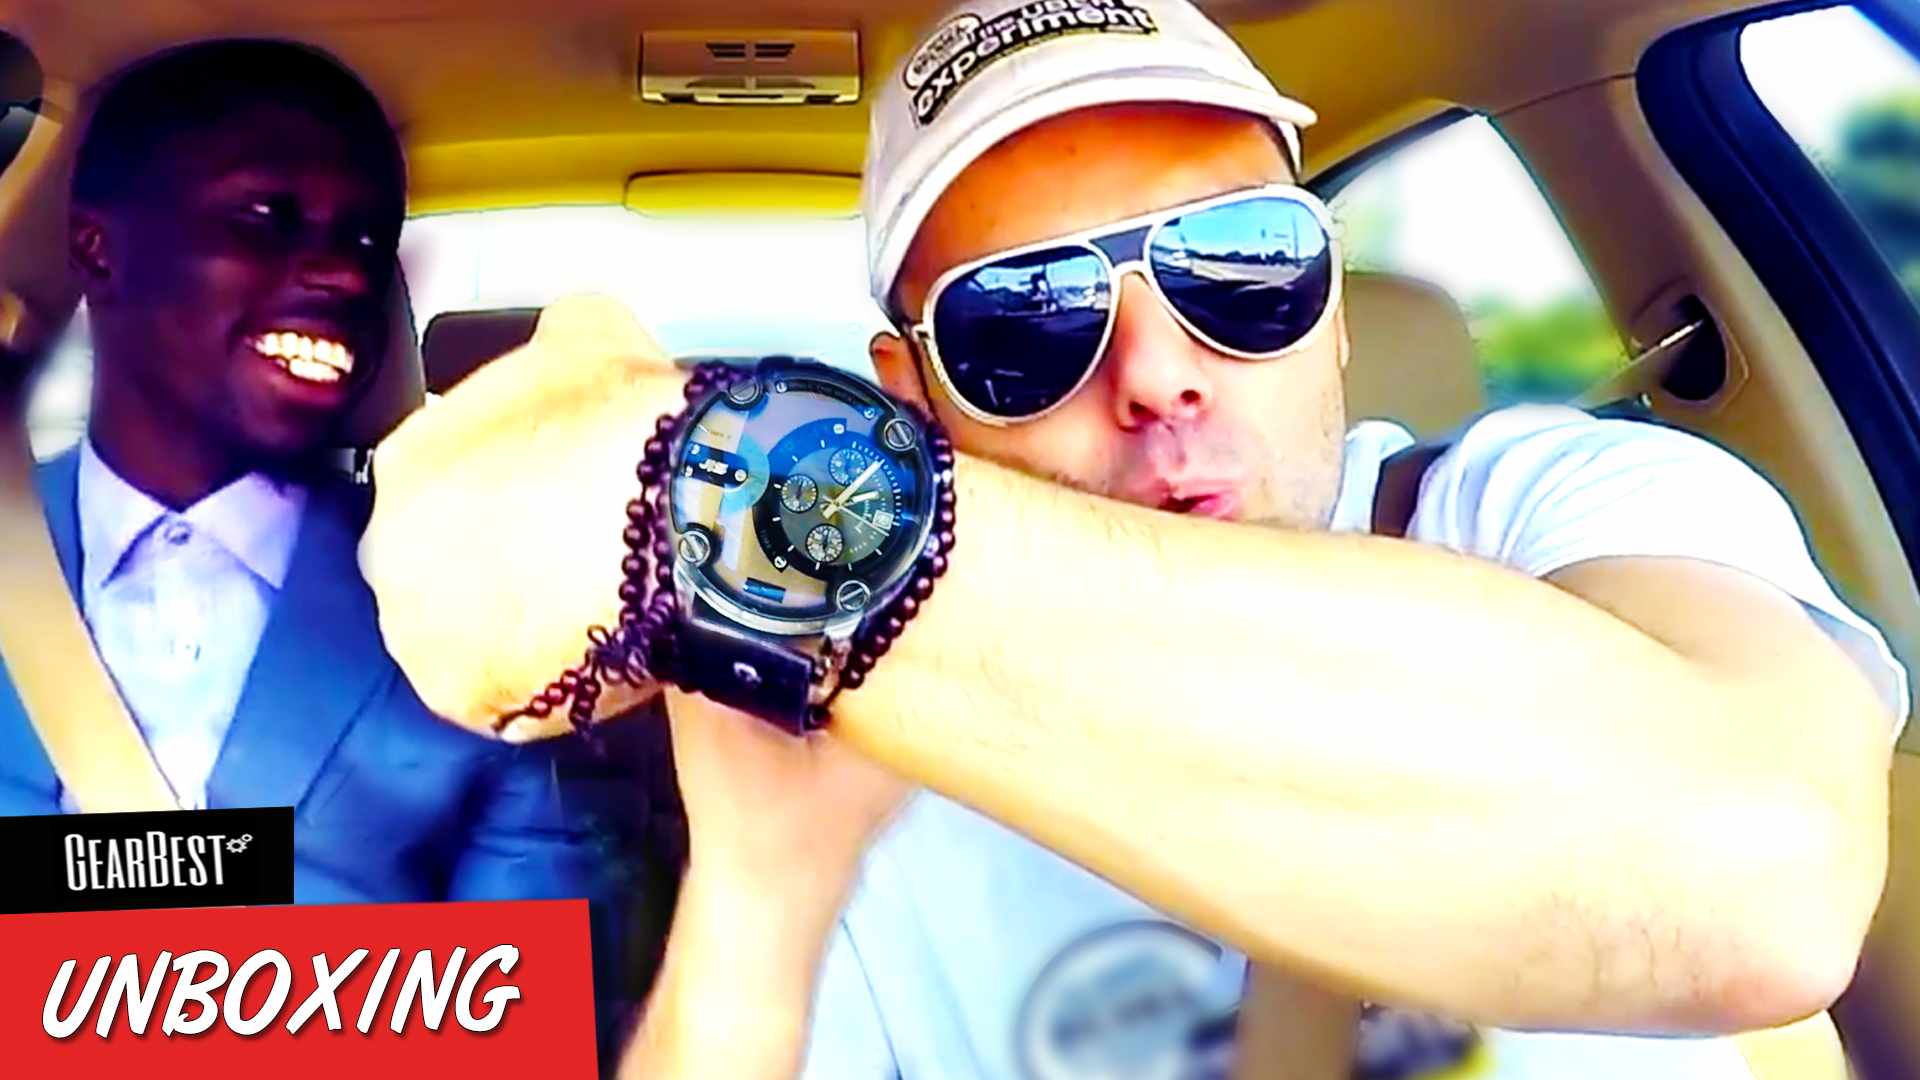 COOLEST WATCH EVER ! Luxury Watch Unboxing Gadget Review from GEARBEST on The UBER Experiment